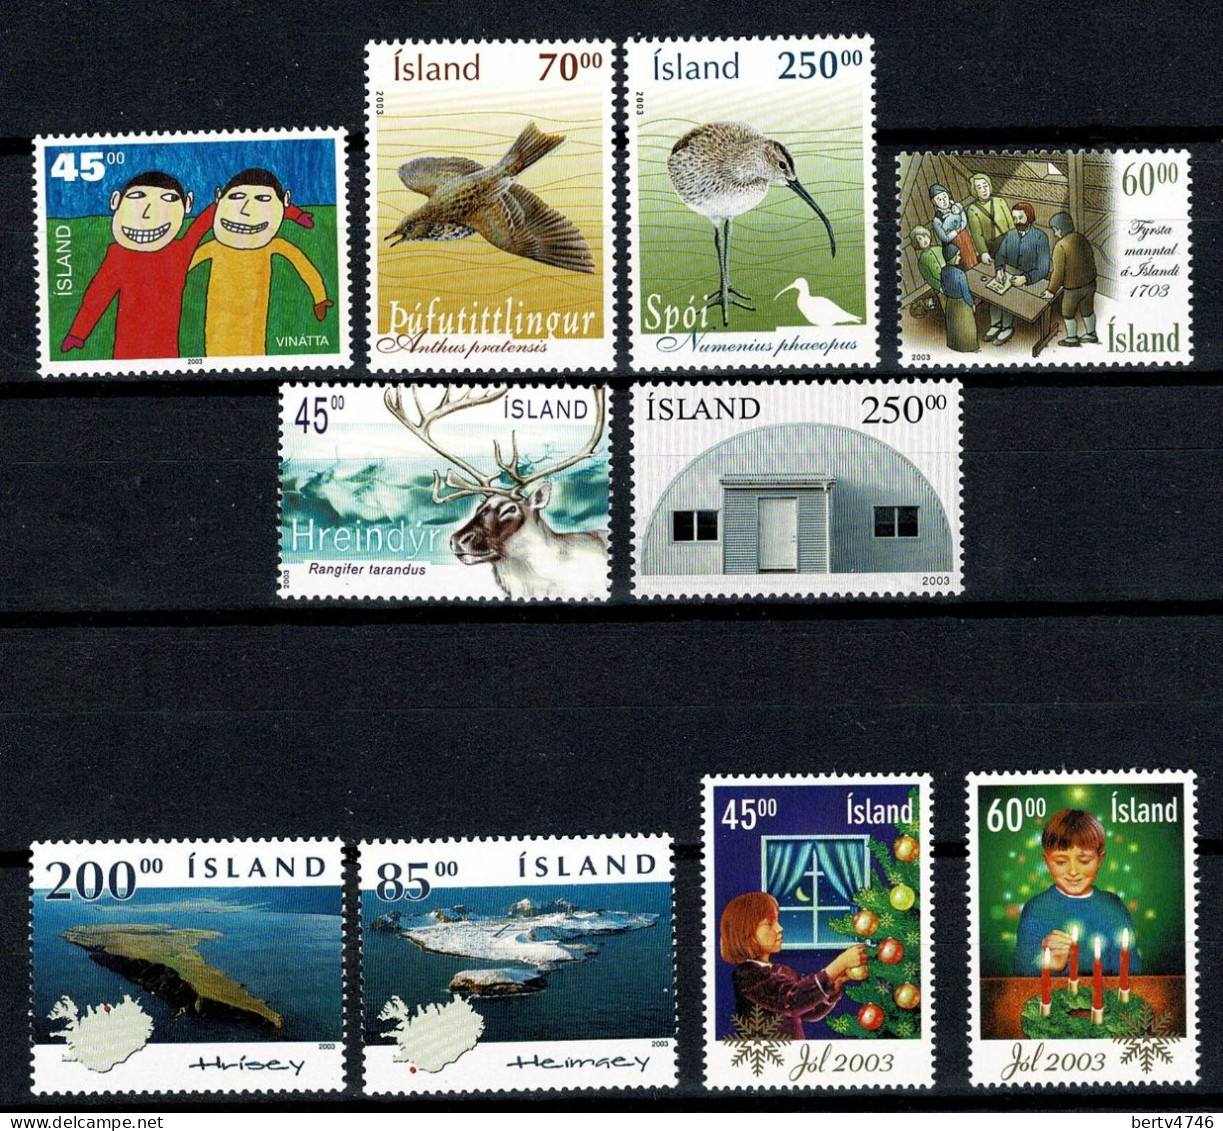 Island - Full Year 2003 Yv 954/59**, Bf 33**, 961/78** MNH (2 Scans) - Années Complètes